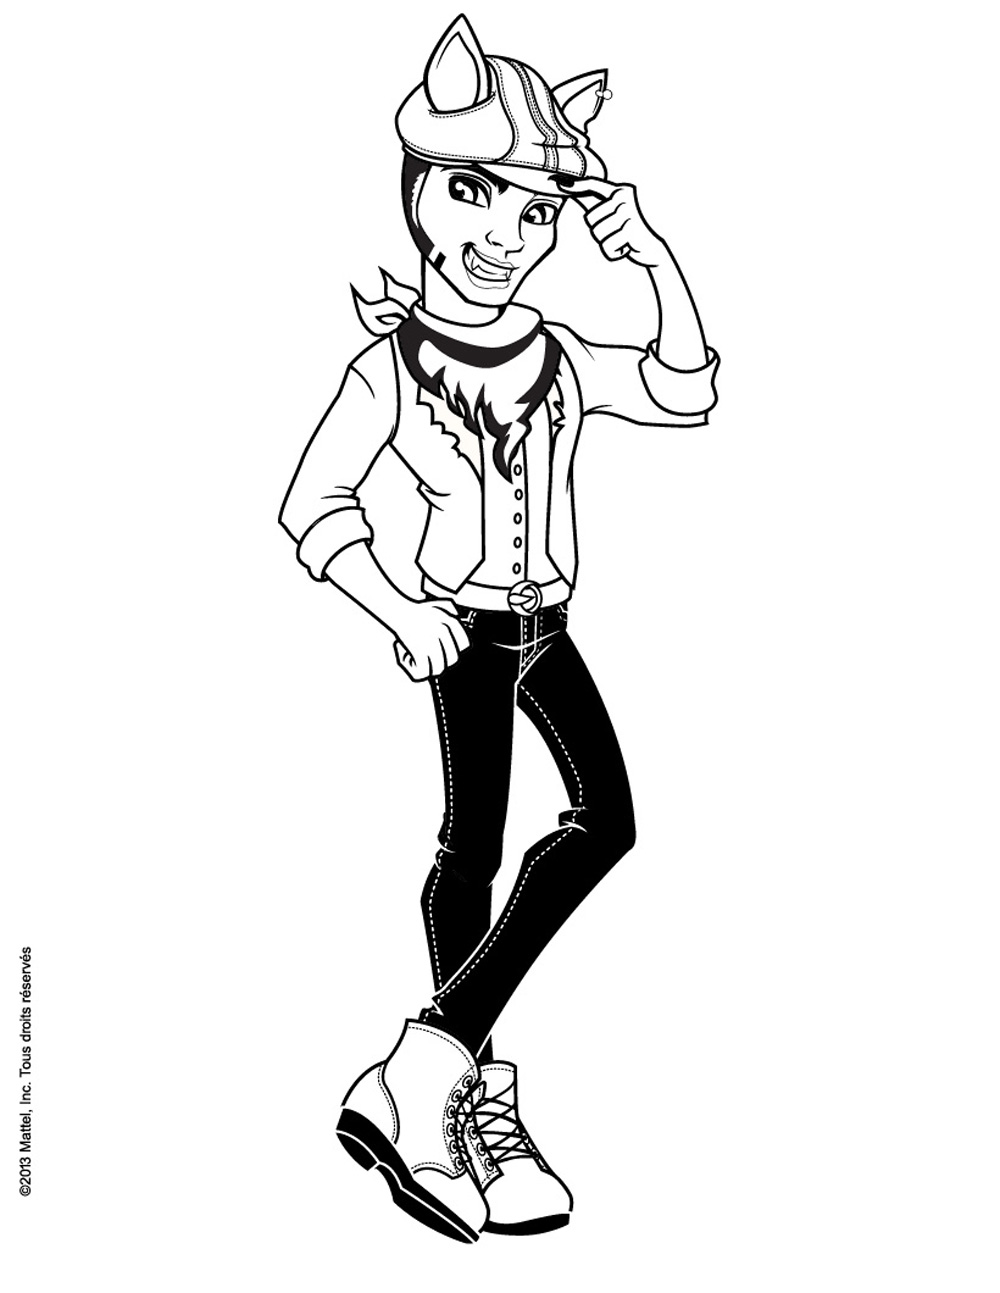 Clawd wolf - Monster High Kids Coloring Pages